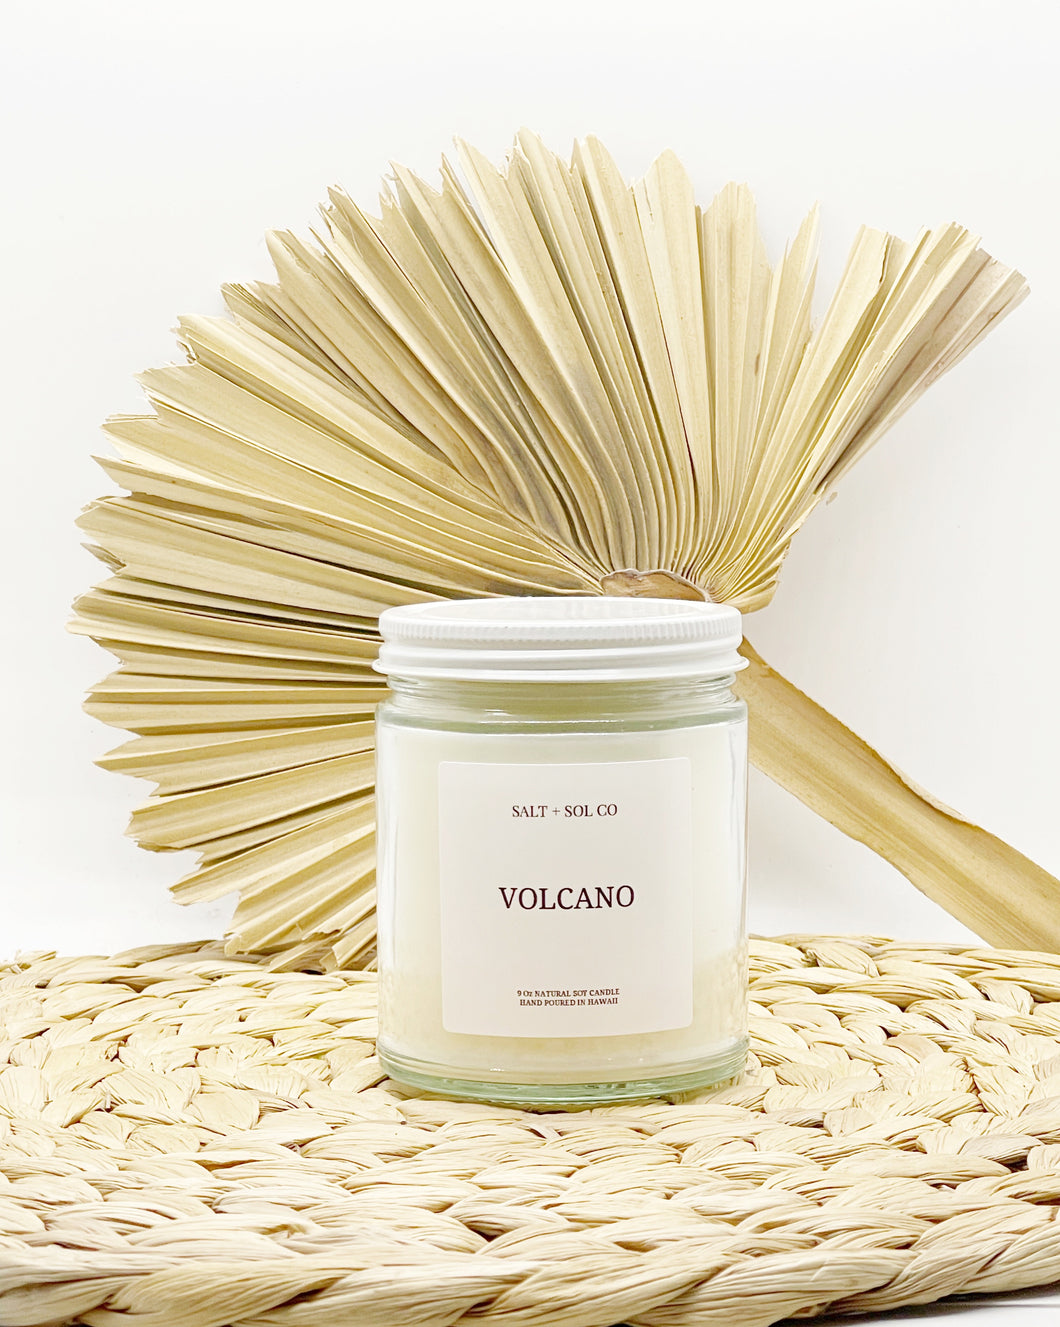 Purchase the Volcano Soy Wax Candle for sale at Salt Sol Co.